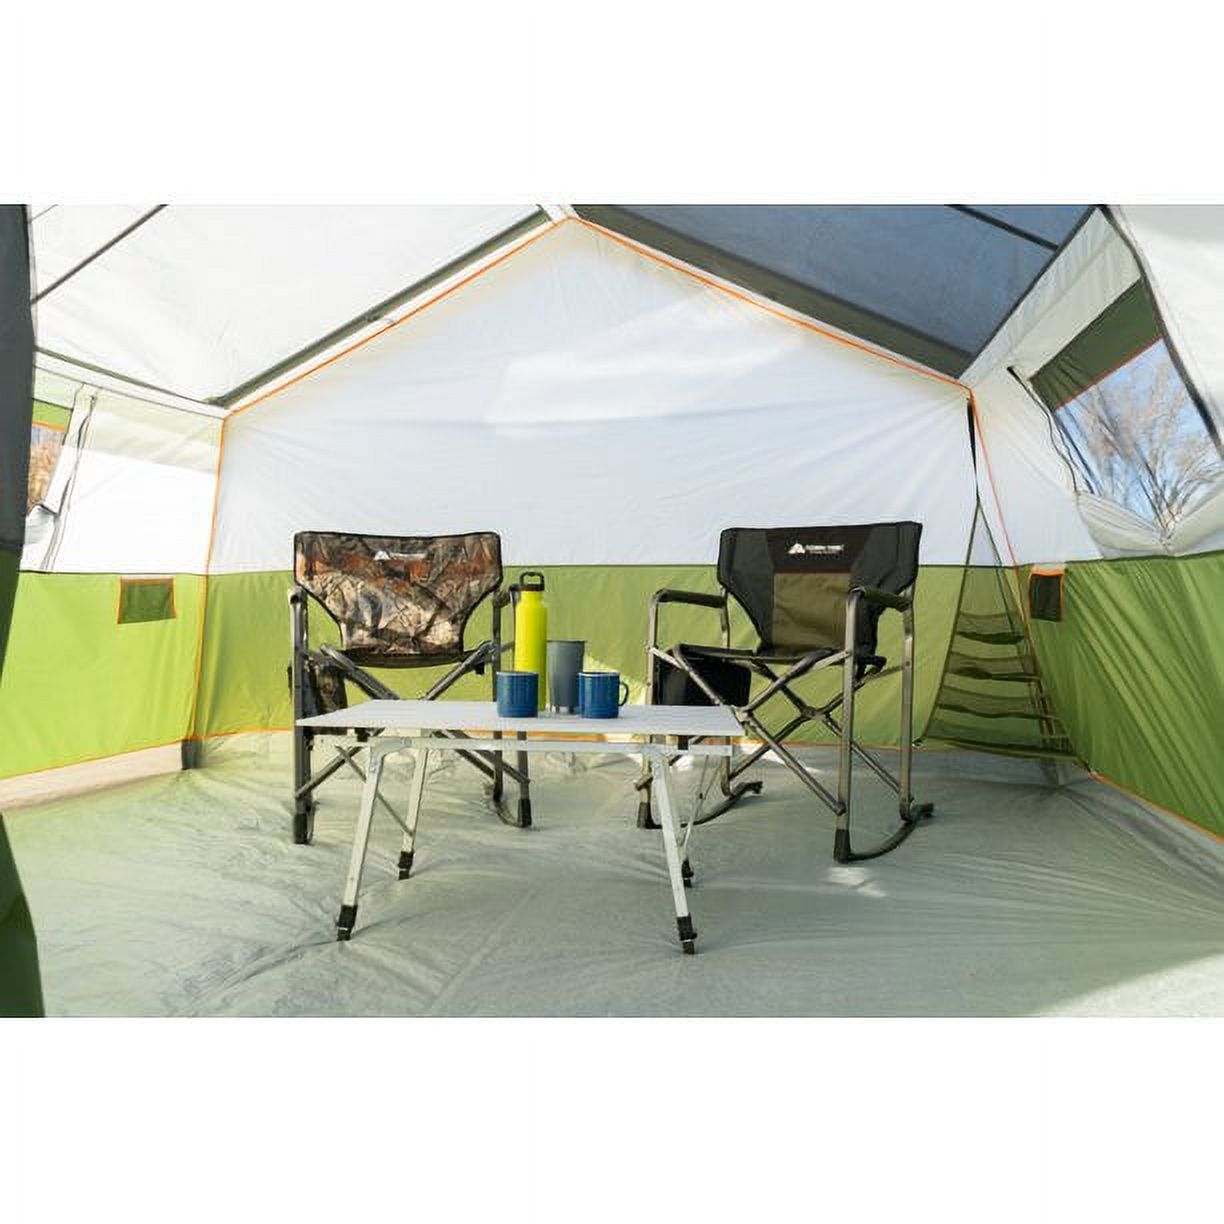 Ozark Trail 8-Person Family Cabin Tent 1 Room with Screen Porch, Green, Dimensions: 12'x11'x7', 45.86 lbs. - image 4 of 12